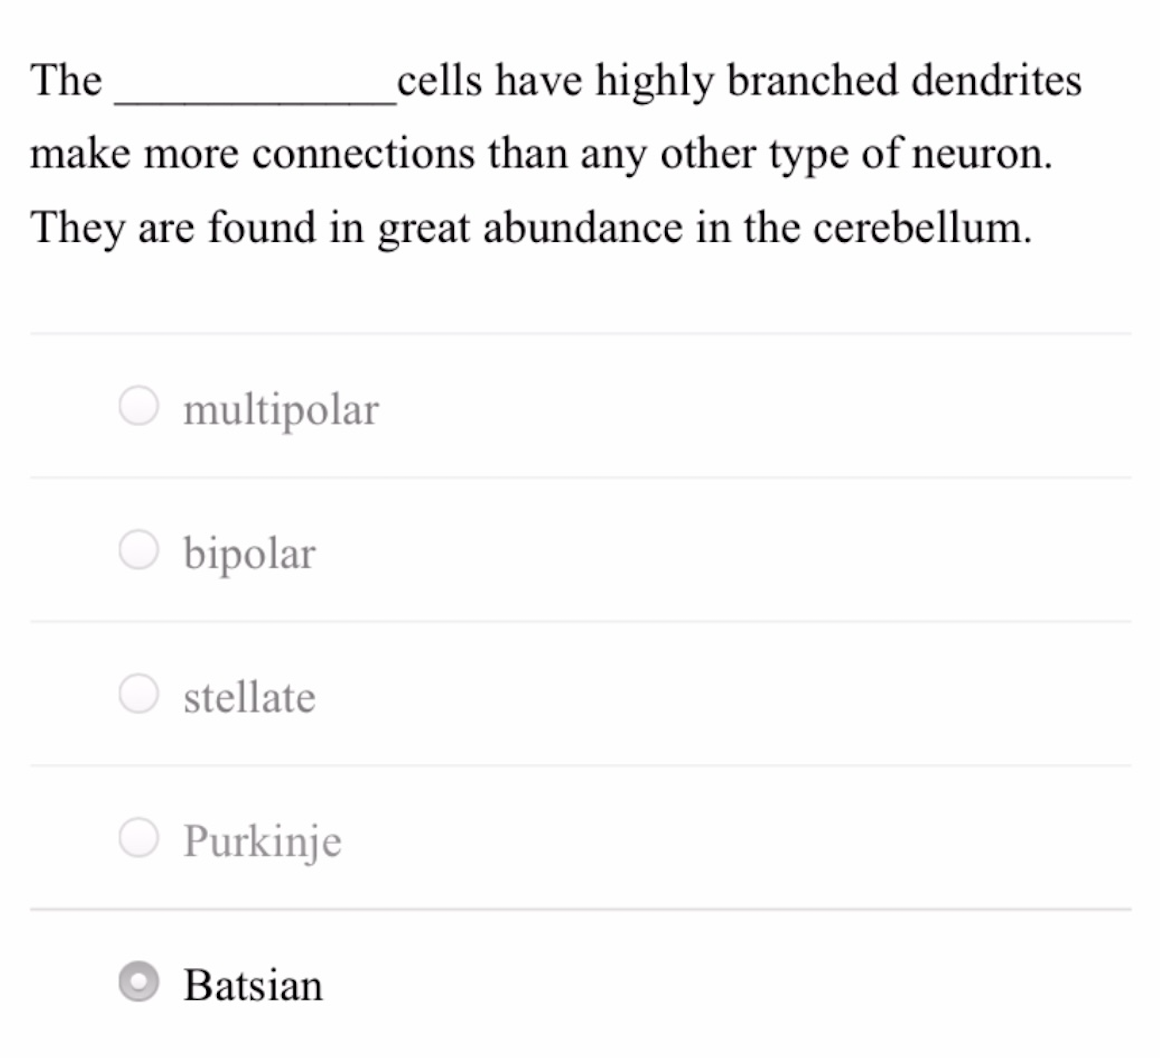 The
cells have highly branched dendrites
make more connections than any other type of neuron.
They are found in great abundance in the cerebellum.
O multipolar
bipolar
O stellate
Purkinje
Batsian
